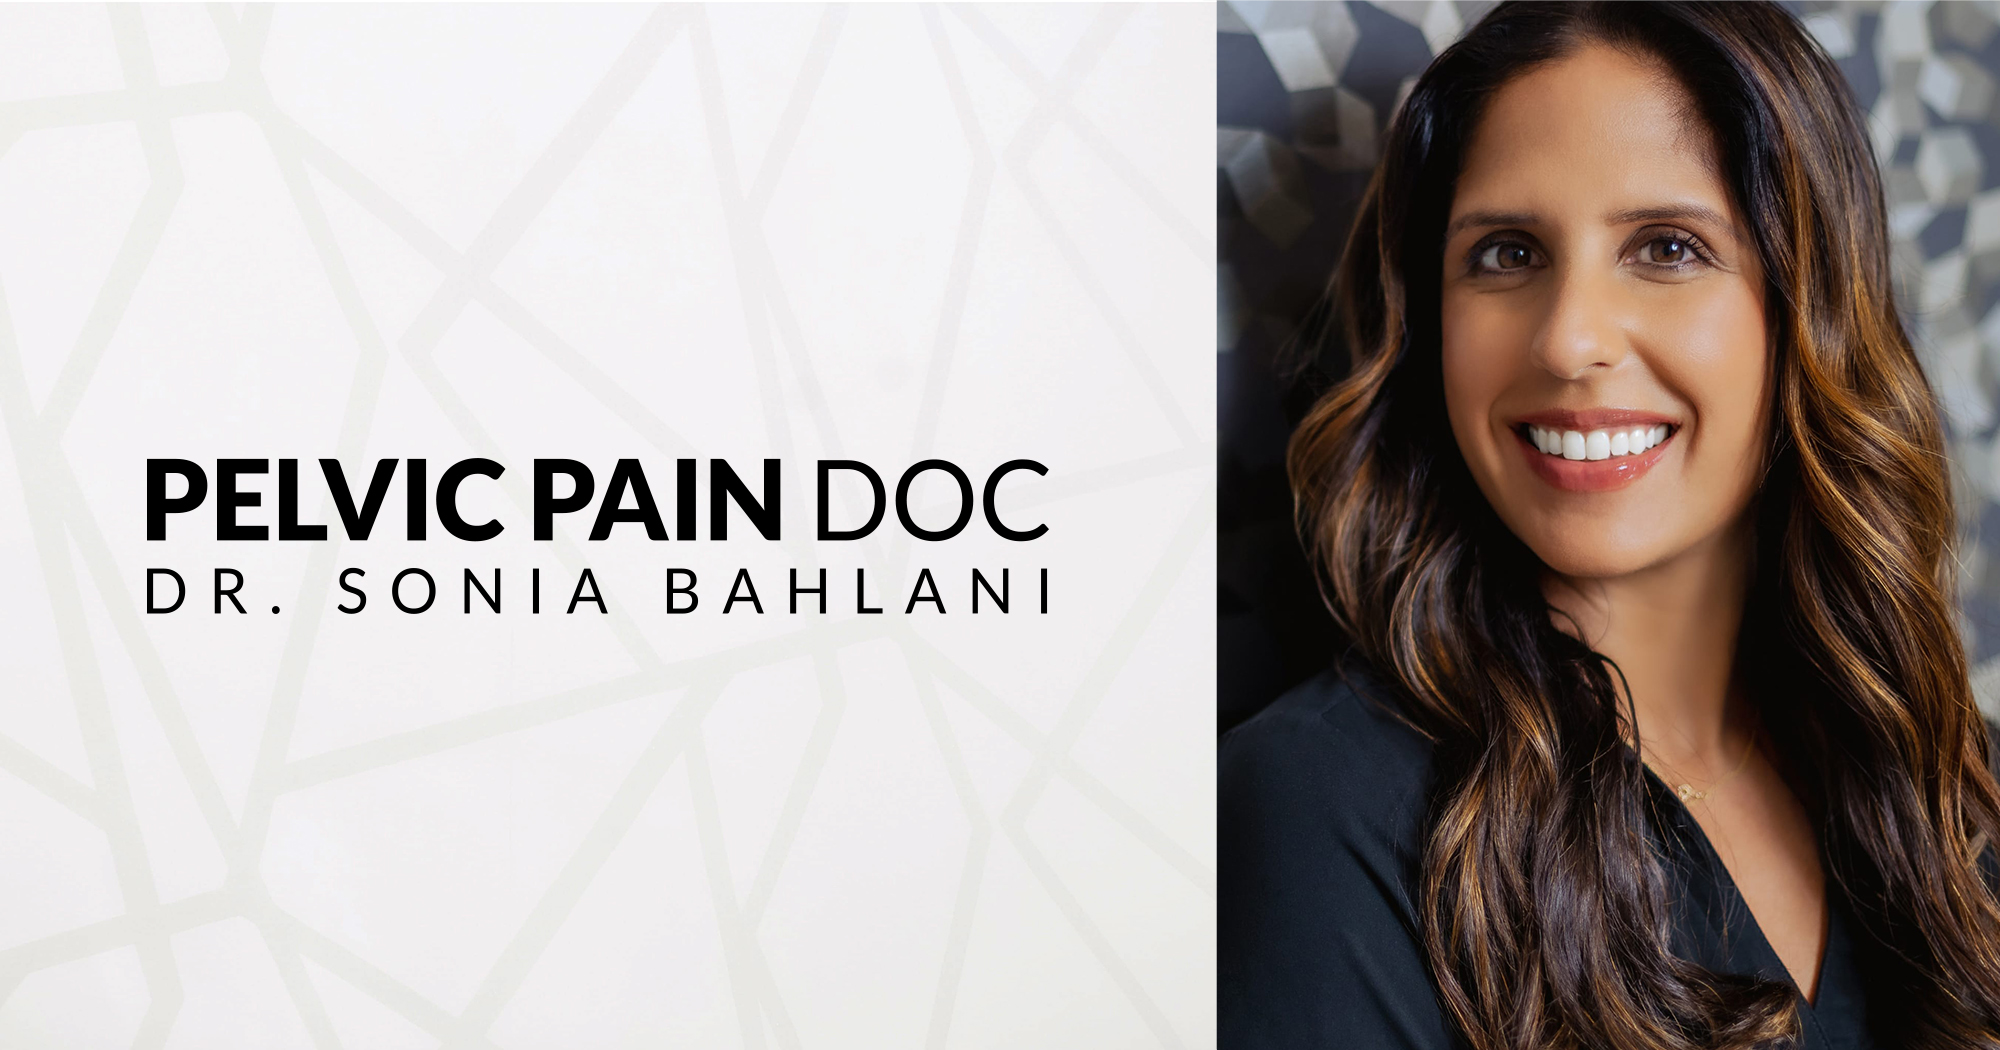 About Dr. Sonia Bahlani